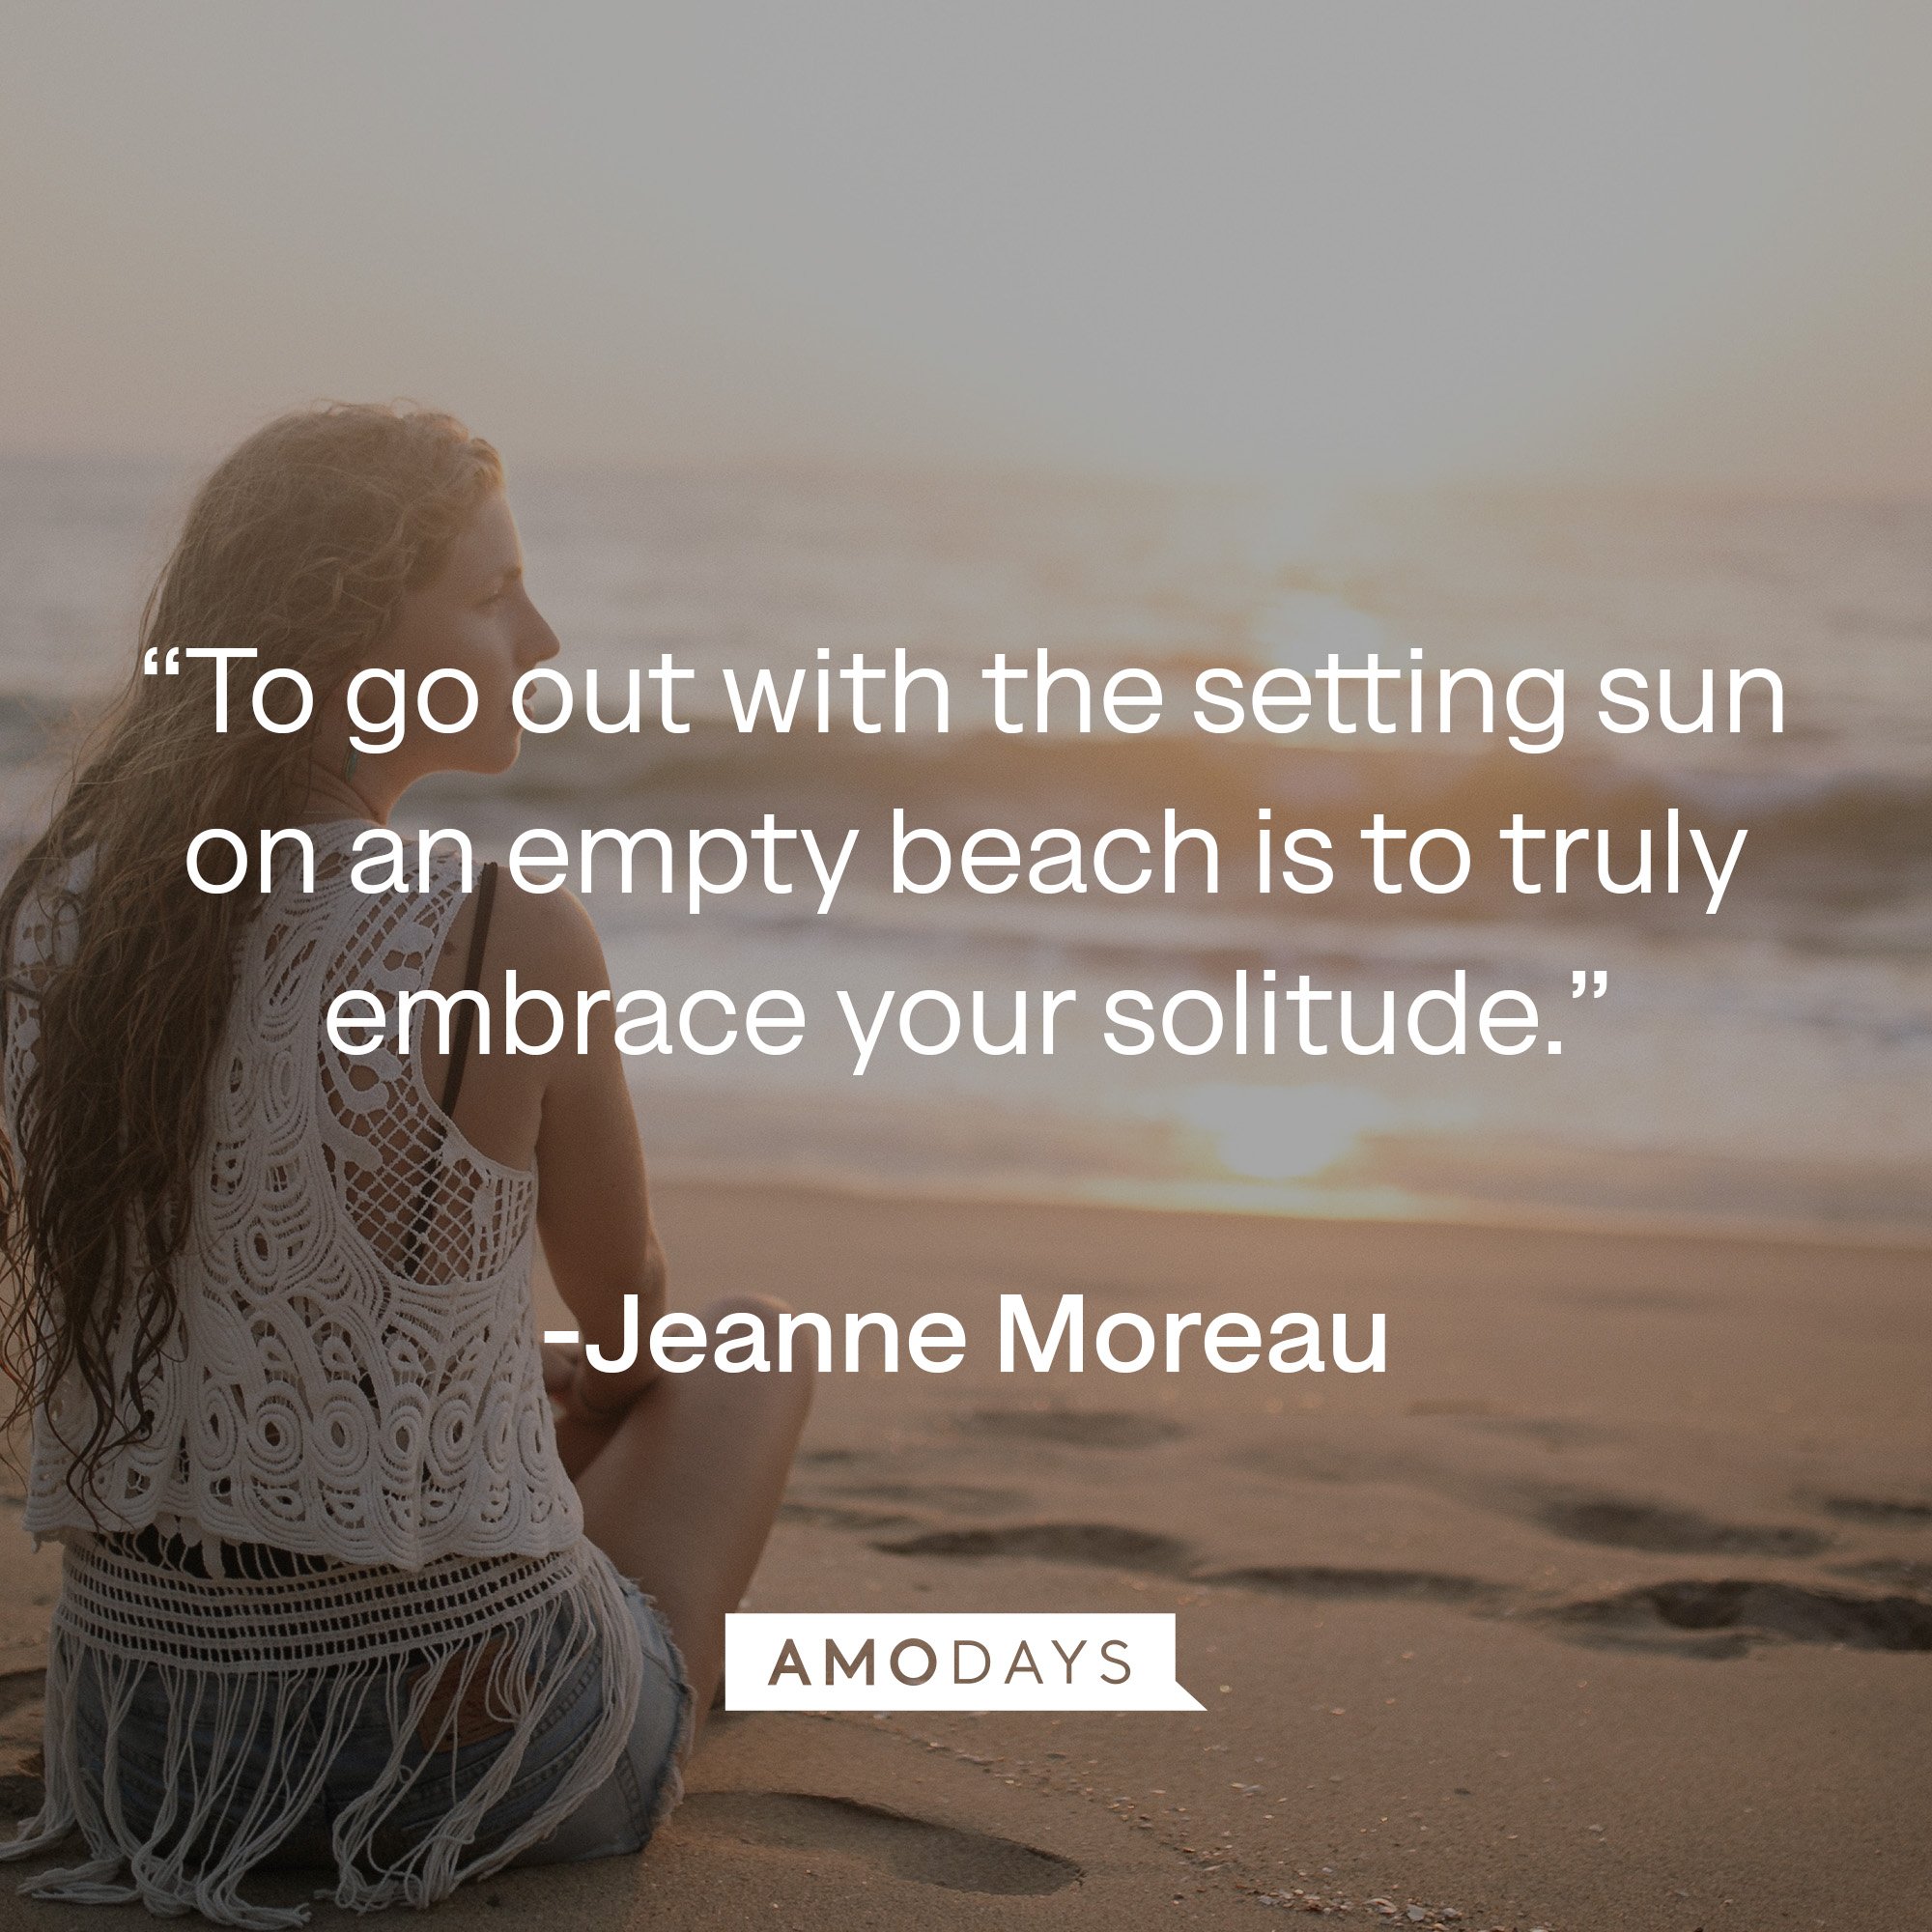 Jeanne Moreau’s quote: “To go out with the setting sun on an empty beach is to truly embrace your solitude.” | Image: Amodays